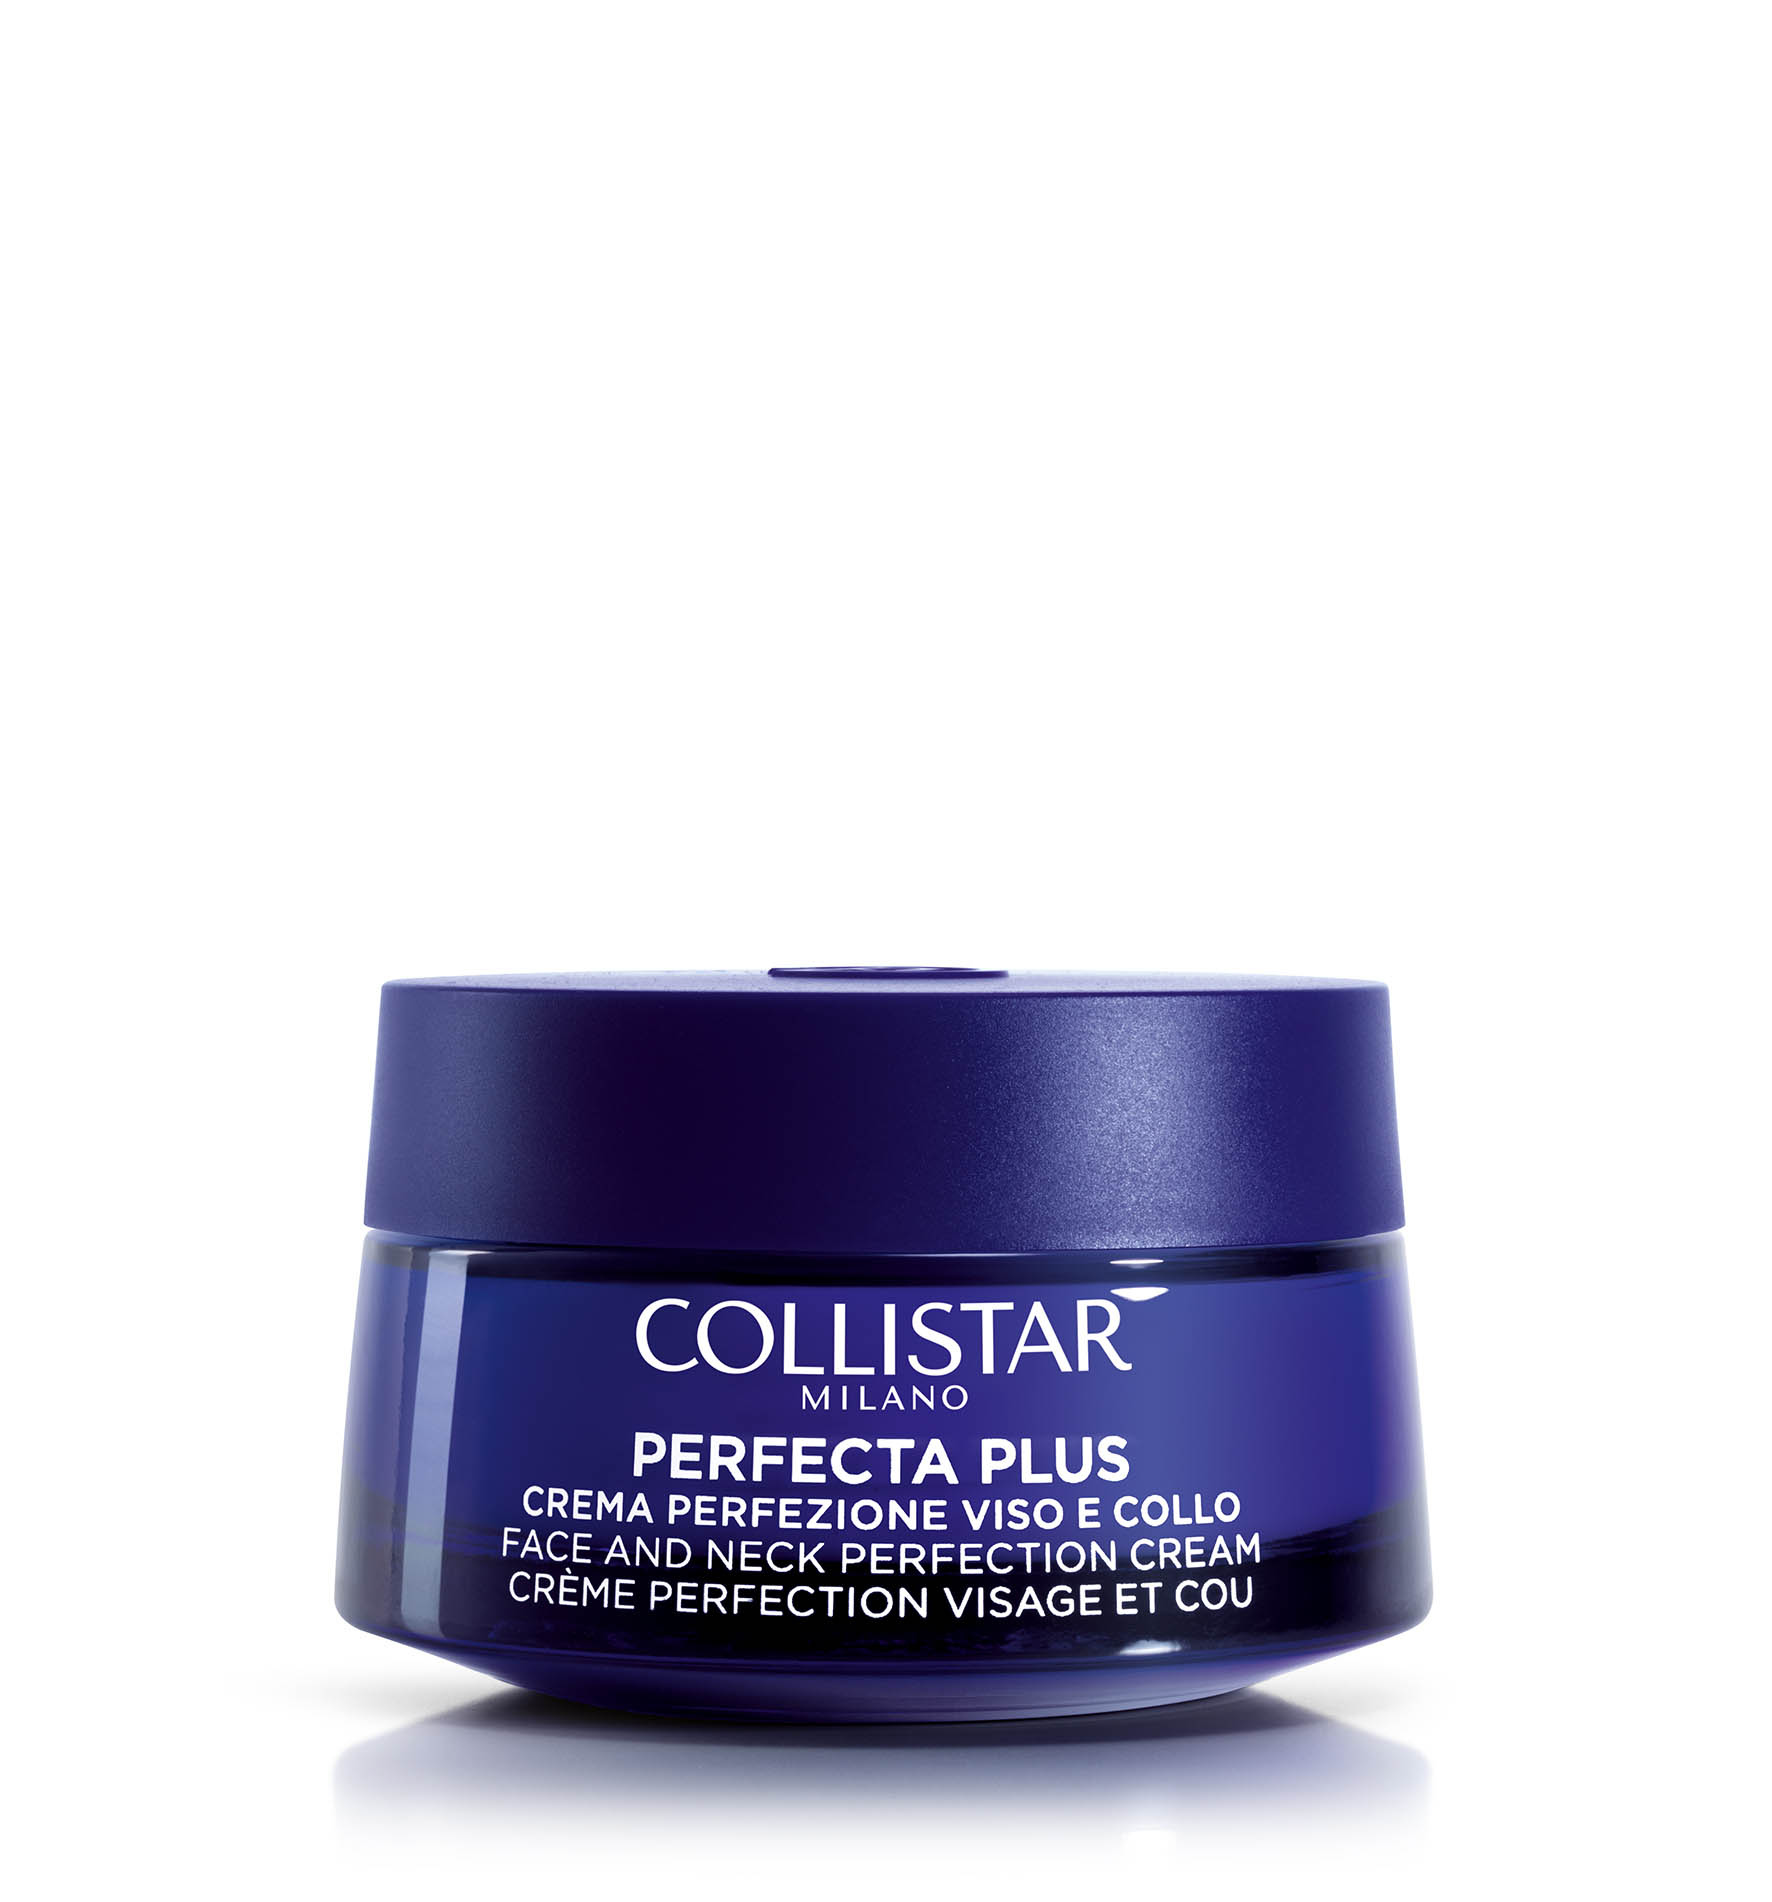 PERFECTA PLUS FACE AND NECK PERFECTION CREAM - Dry skin | Collistar - Shop Online Ufficiale